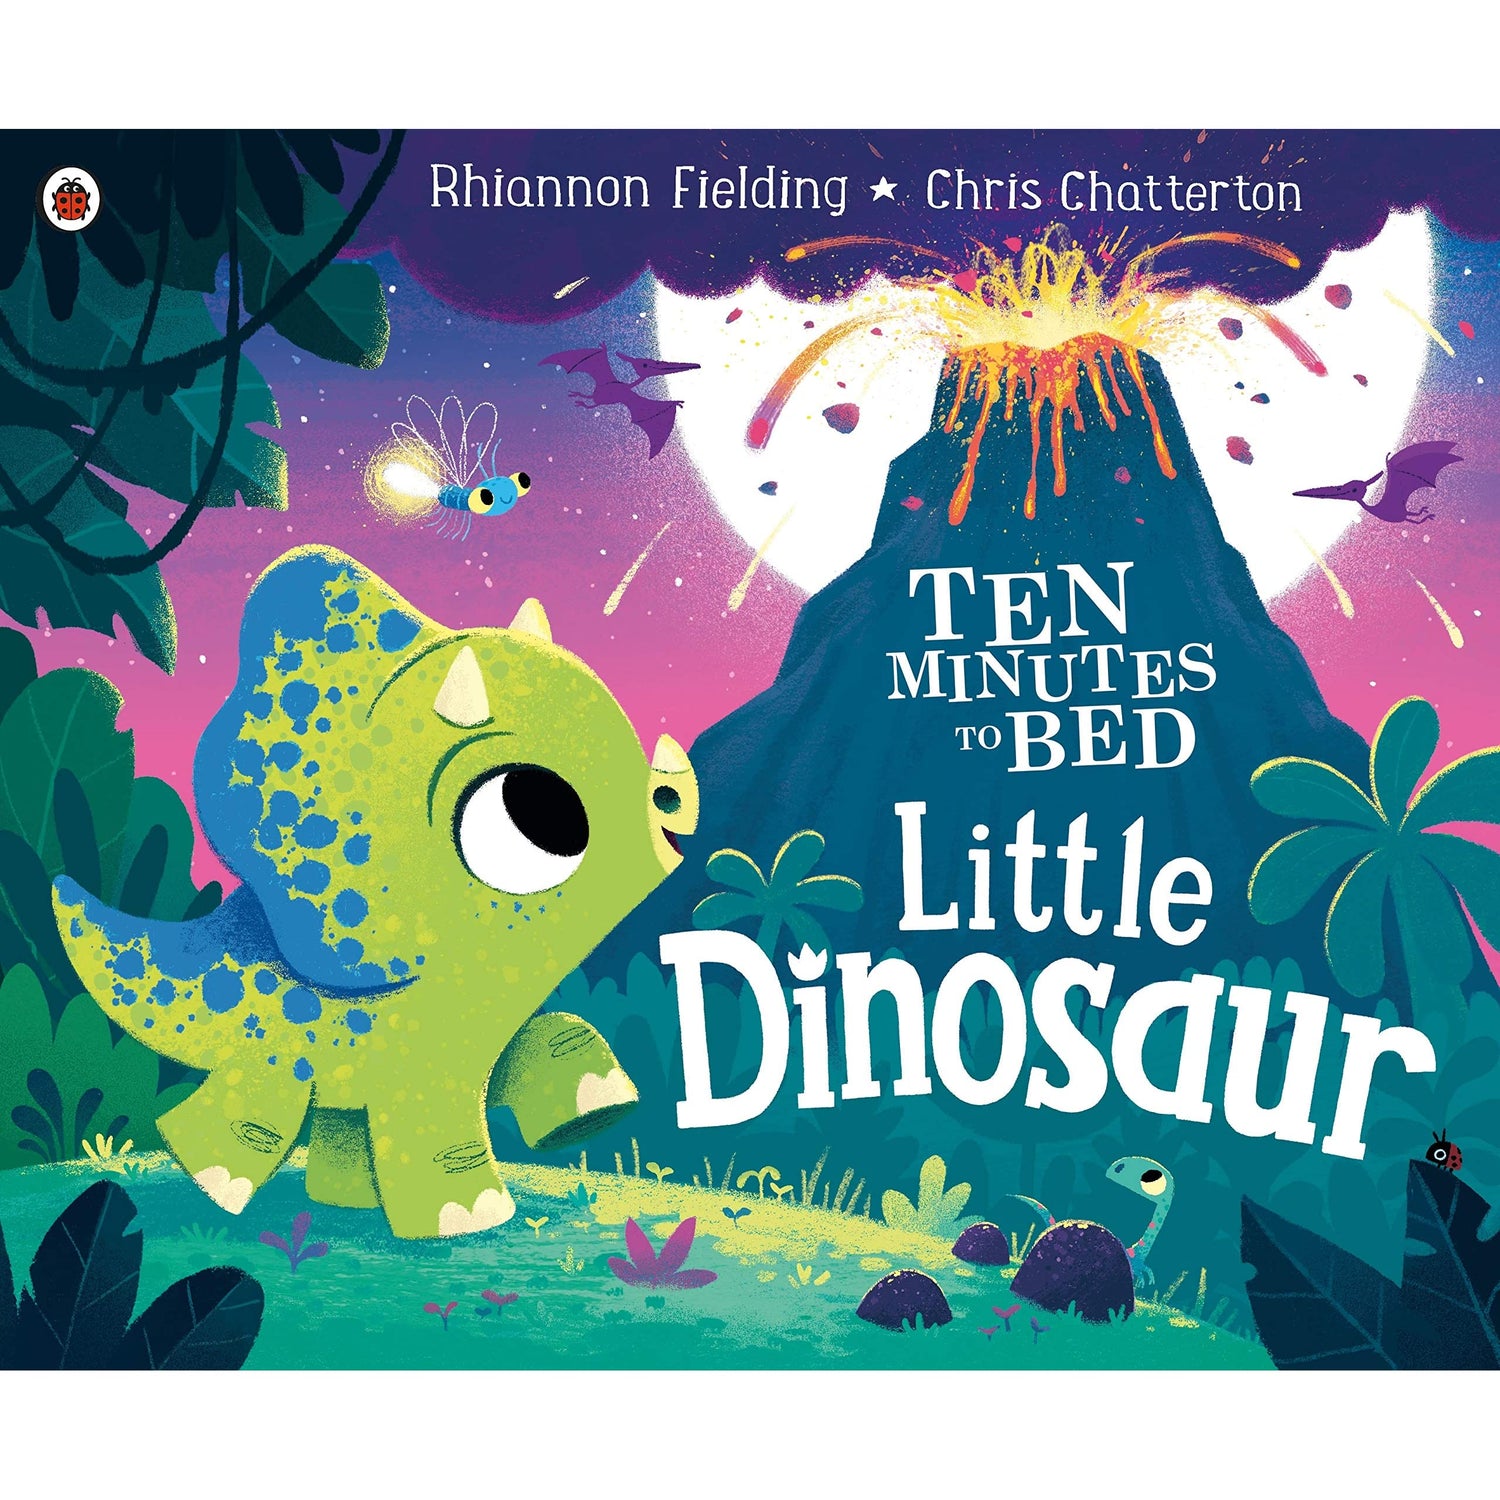 Interactive children's books with puzzles, lift-the-flap and peek-through options for an enjoyable pre-bedtime read! Ten Minutes to Bed Little Dinosaur